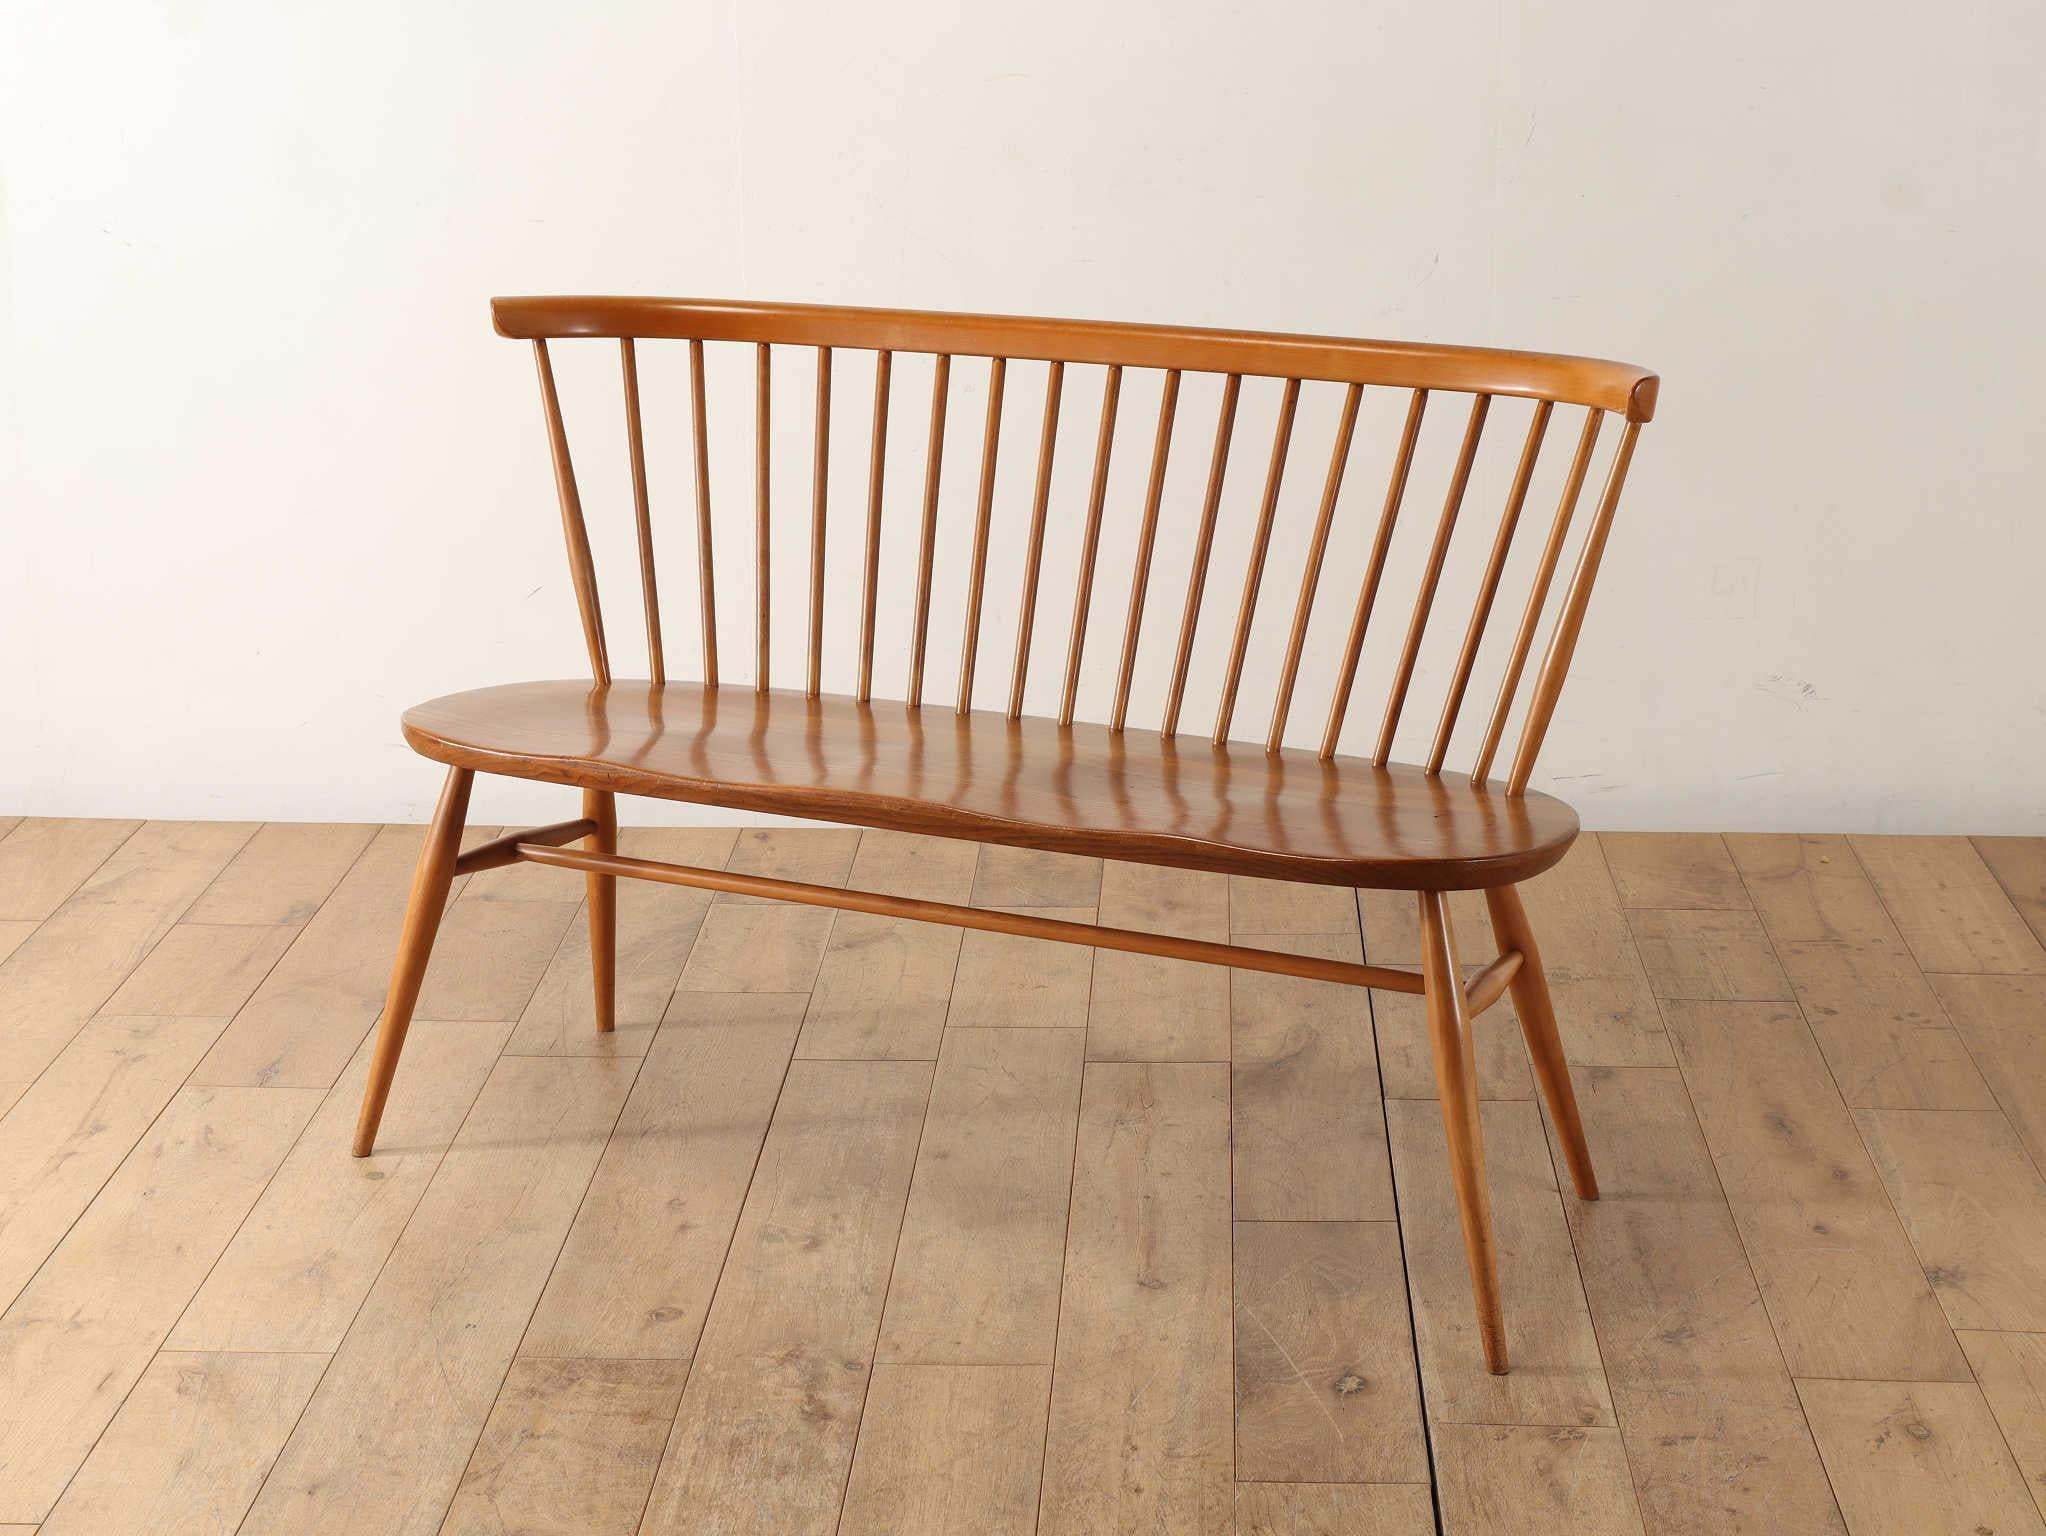 The Ercol loveseat is a representative of UK modernity and is still a popular brand founded by designer Lucian R. Ercolani in 1920. The smooth form of the seat, made of hard, bend-resistant elm wood with smooth corners, fits tenferly against the